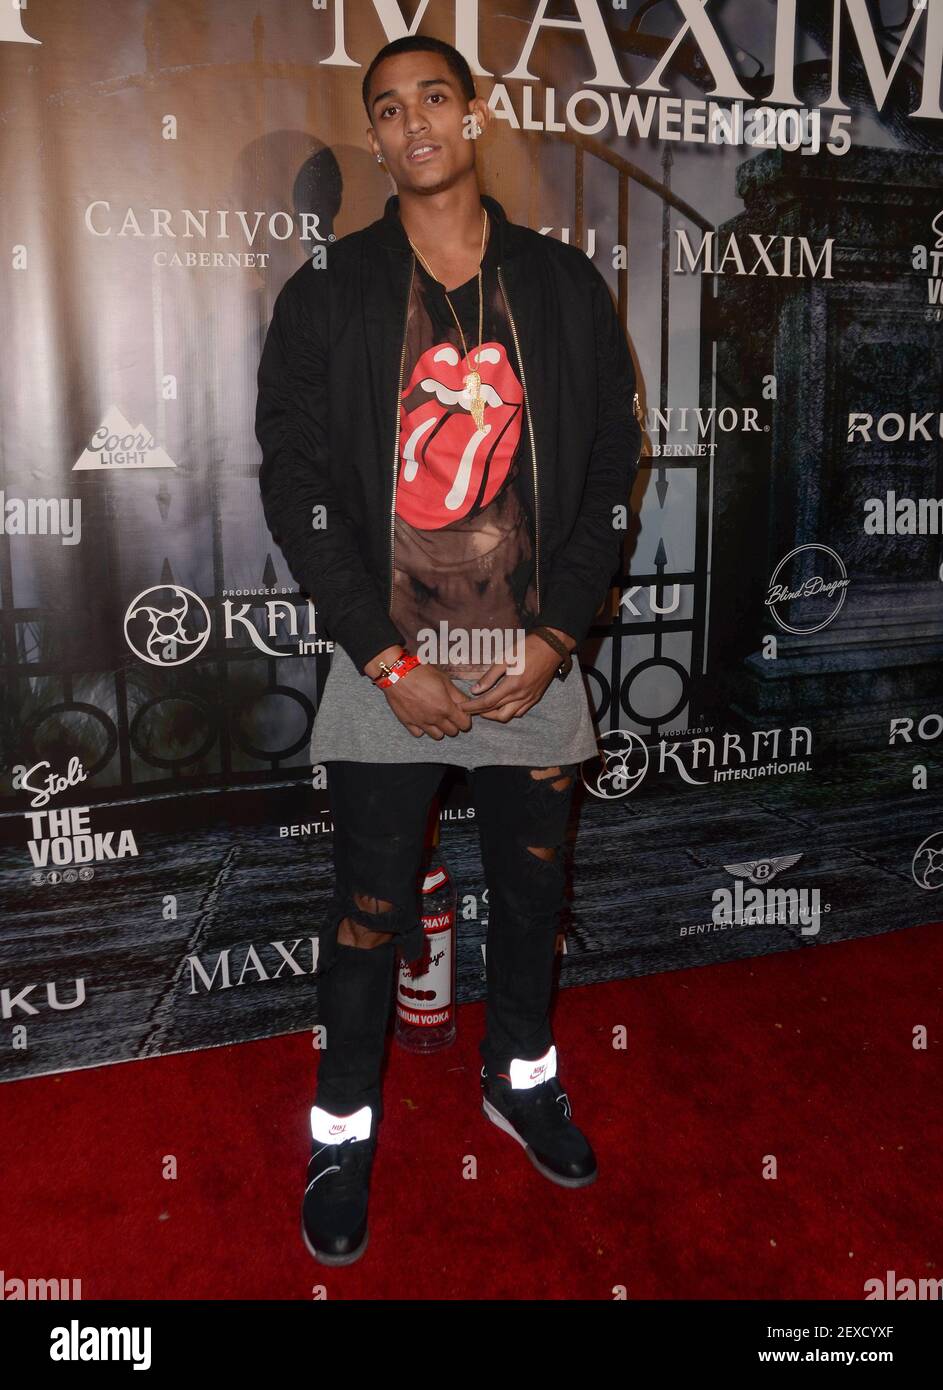 23 October - Beverly Hills, Ca - Jordan Clarkson. Arrivals for MAXIM  Magazine's Official Halloween Party held at